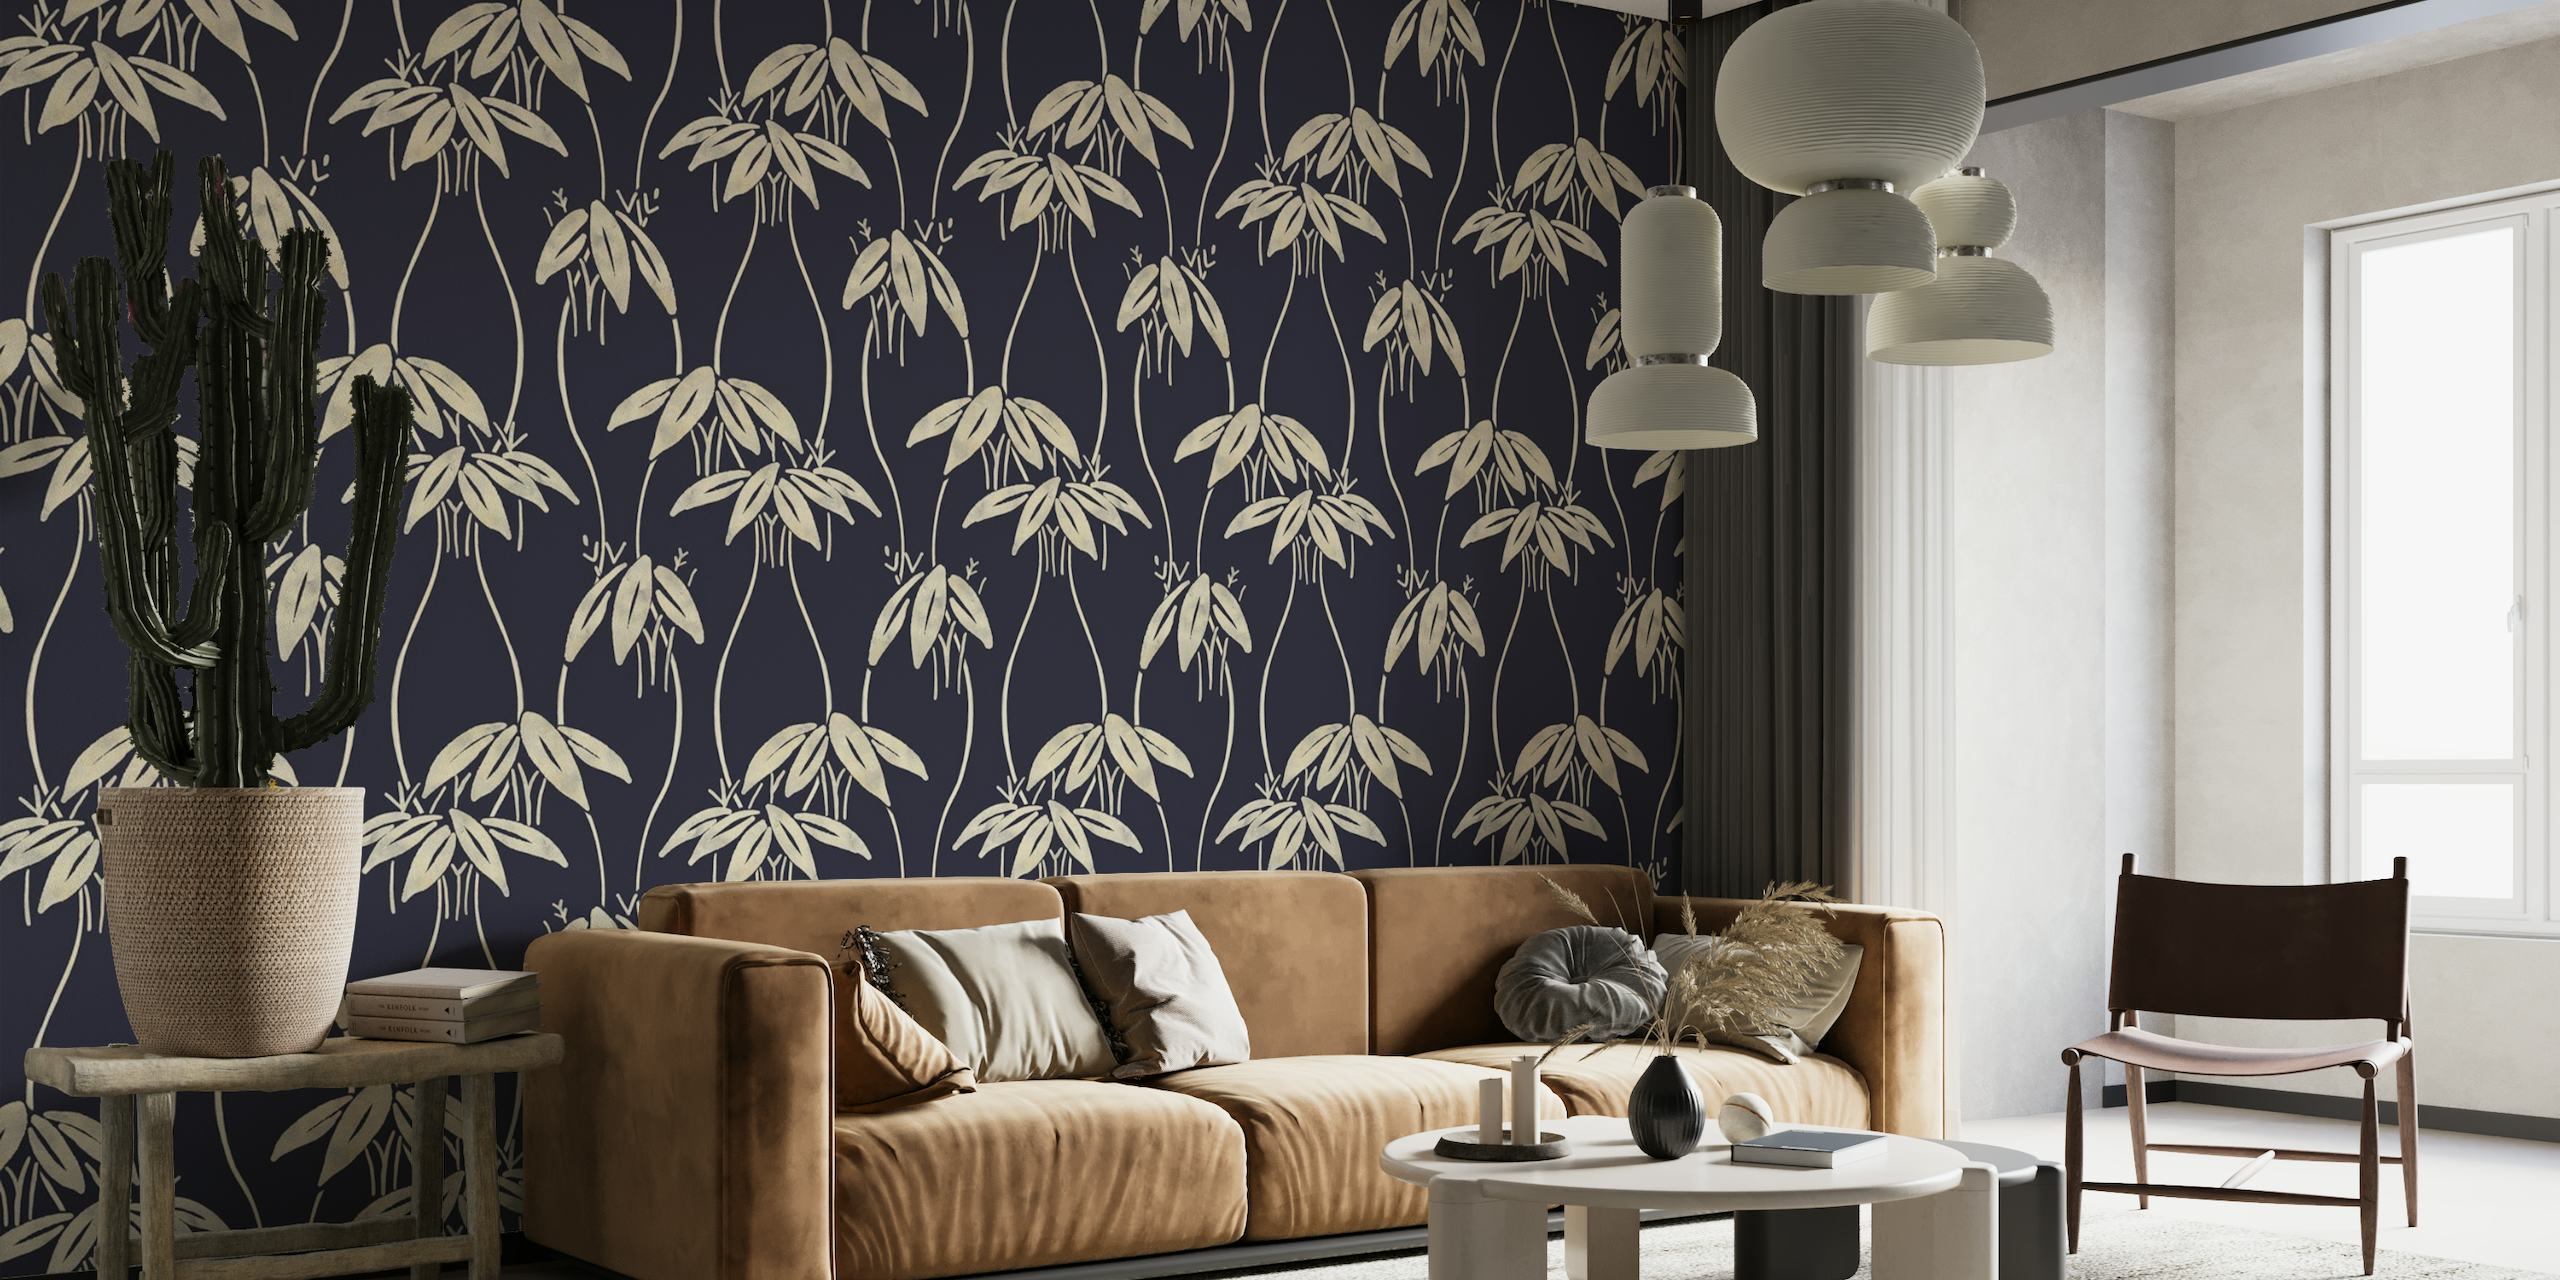 Elegant white bamboo pattern on a navy blue background wall mural